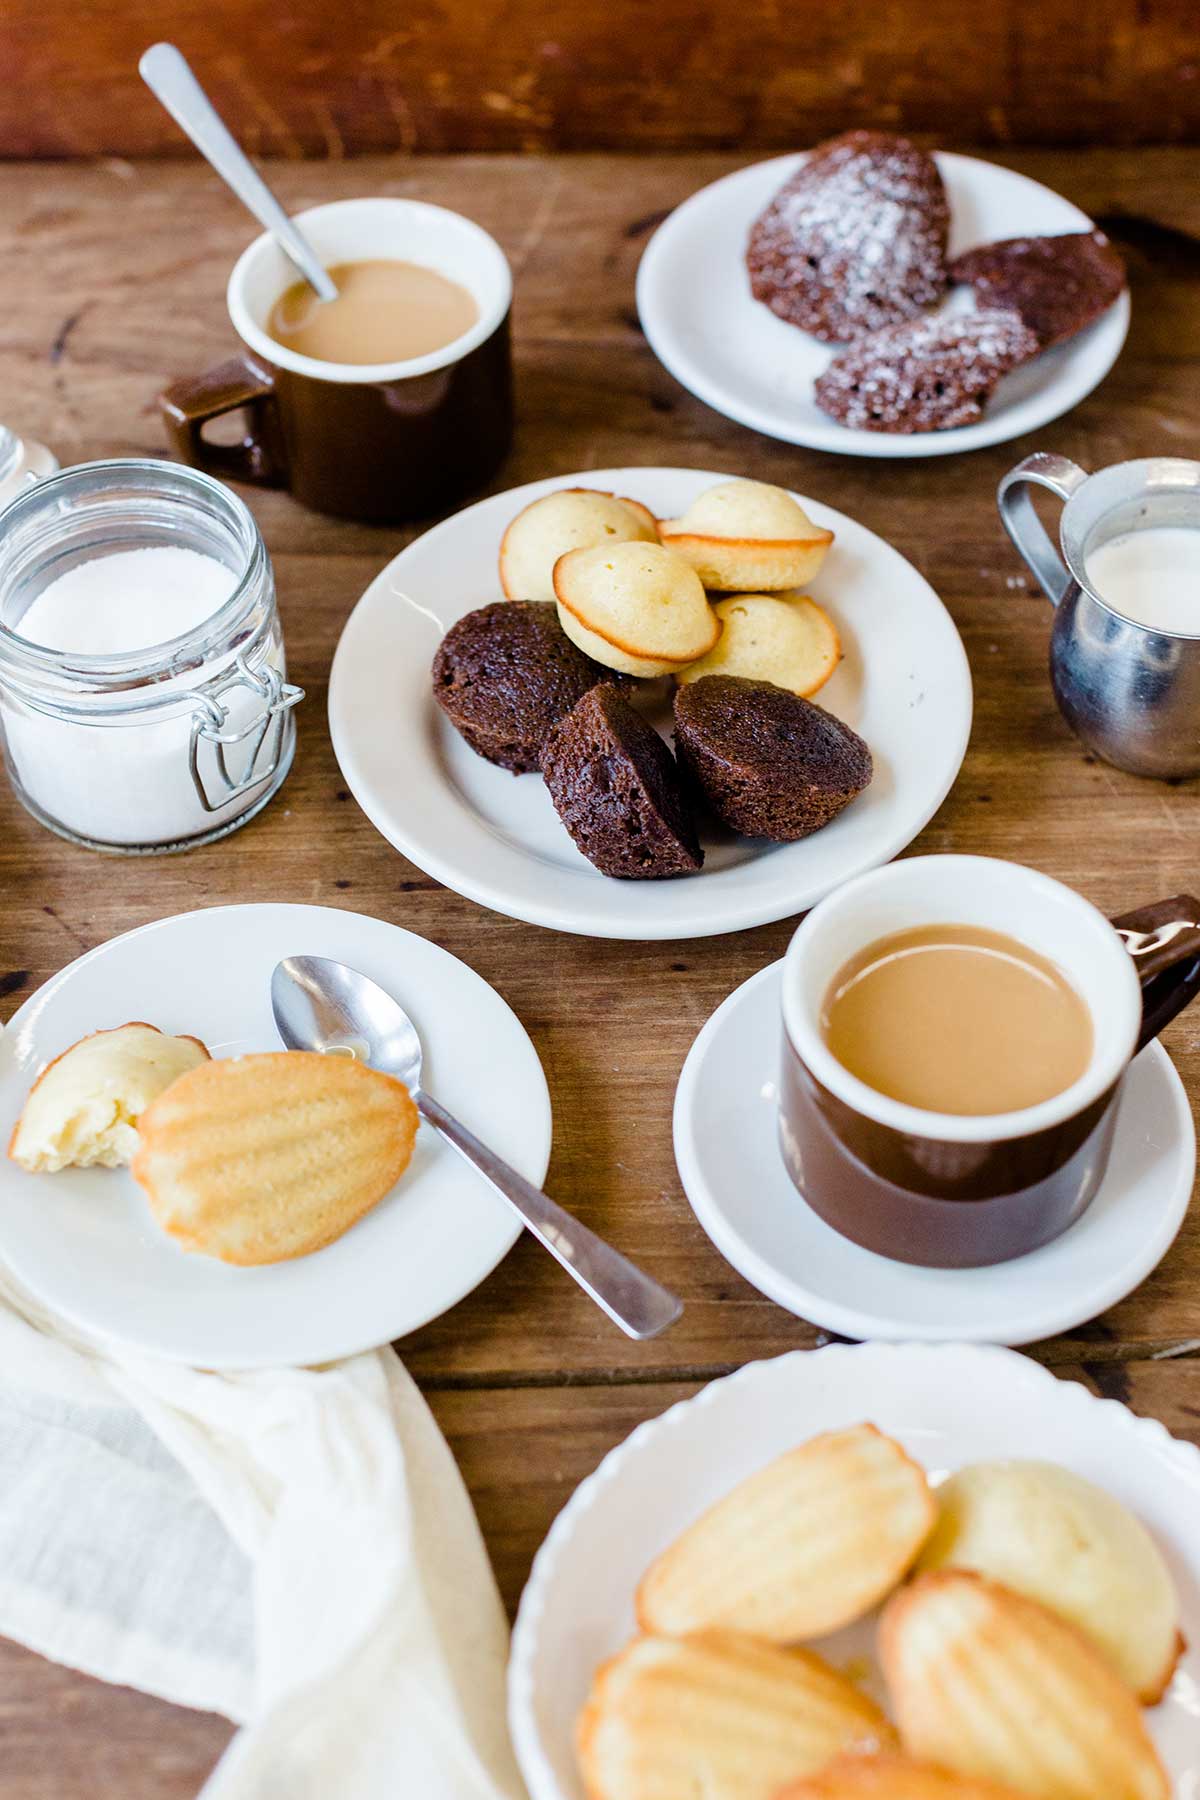 A table arranged with a platter of madeleines, coffee cups, plates, spoons, and a jar of sugar